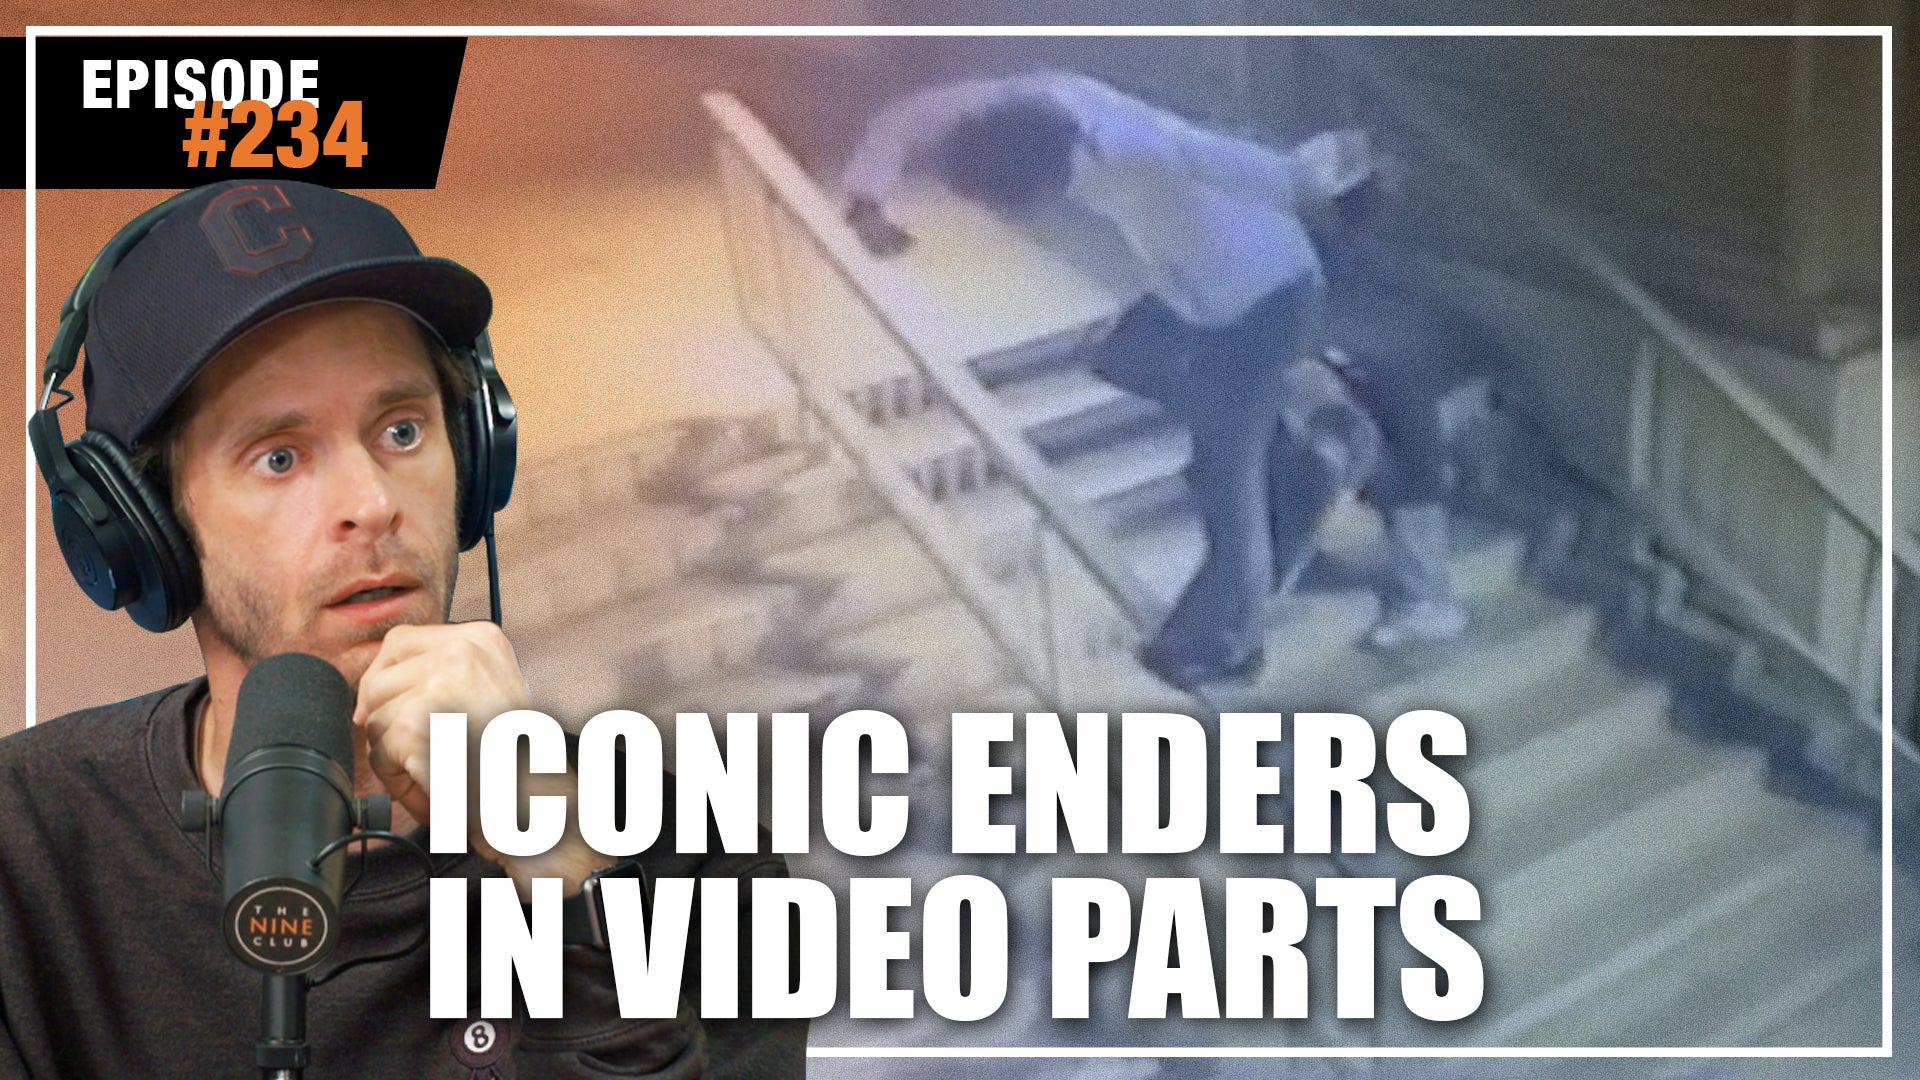 EXPERIENCE #234 - Iconic Enders In Video Parts